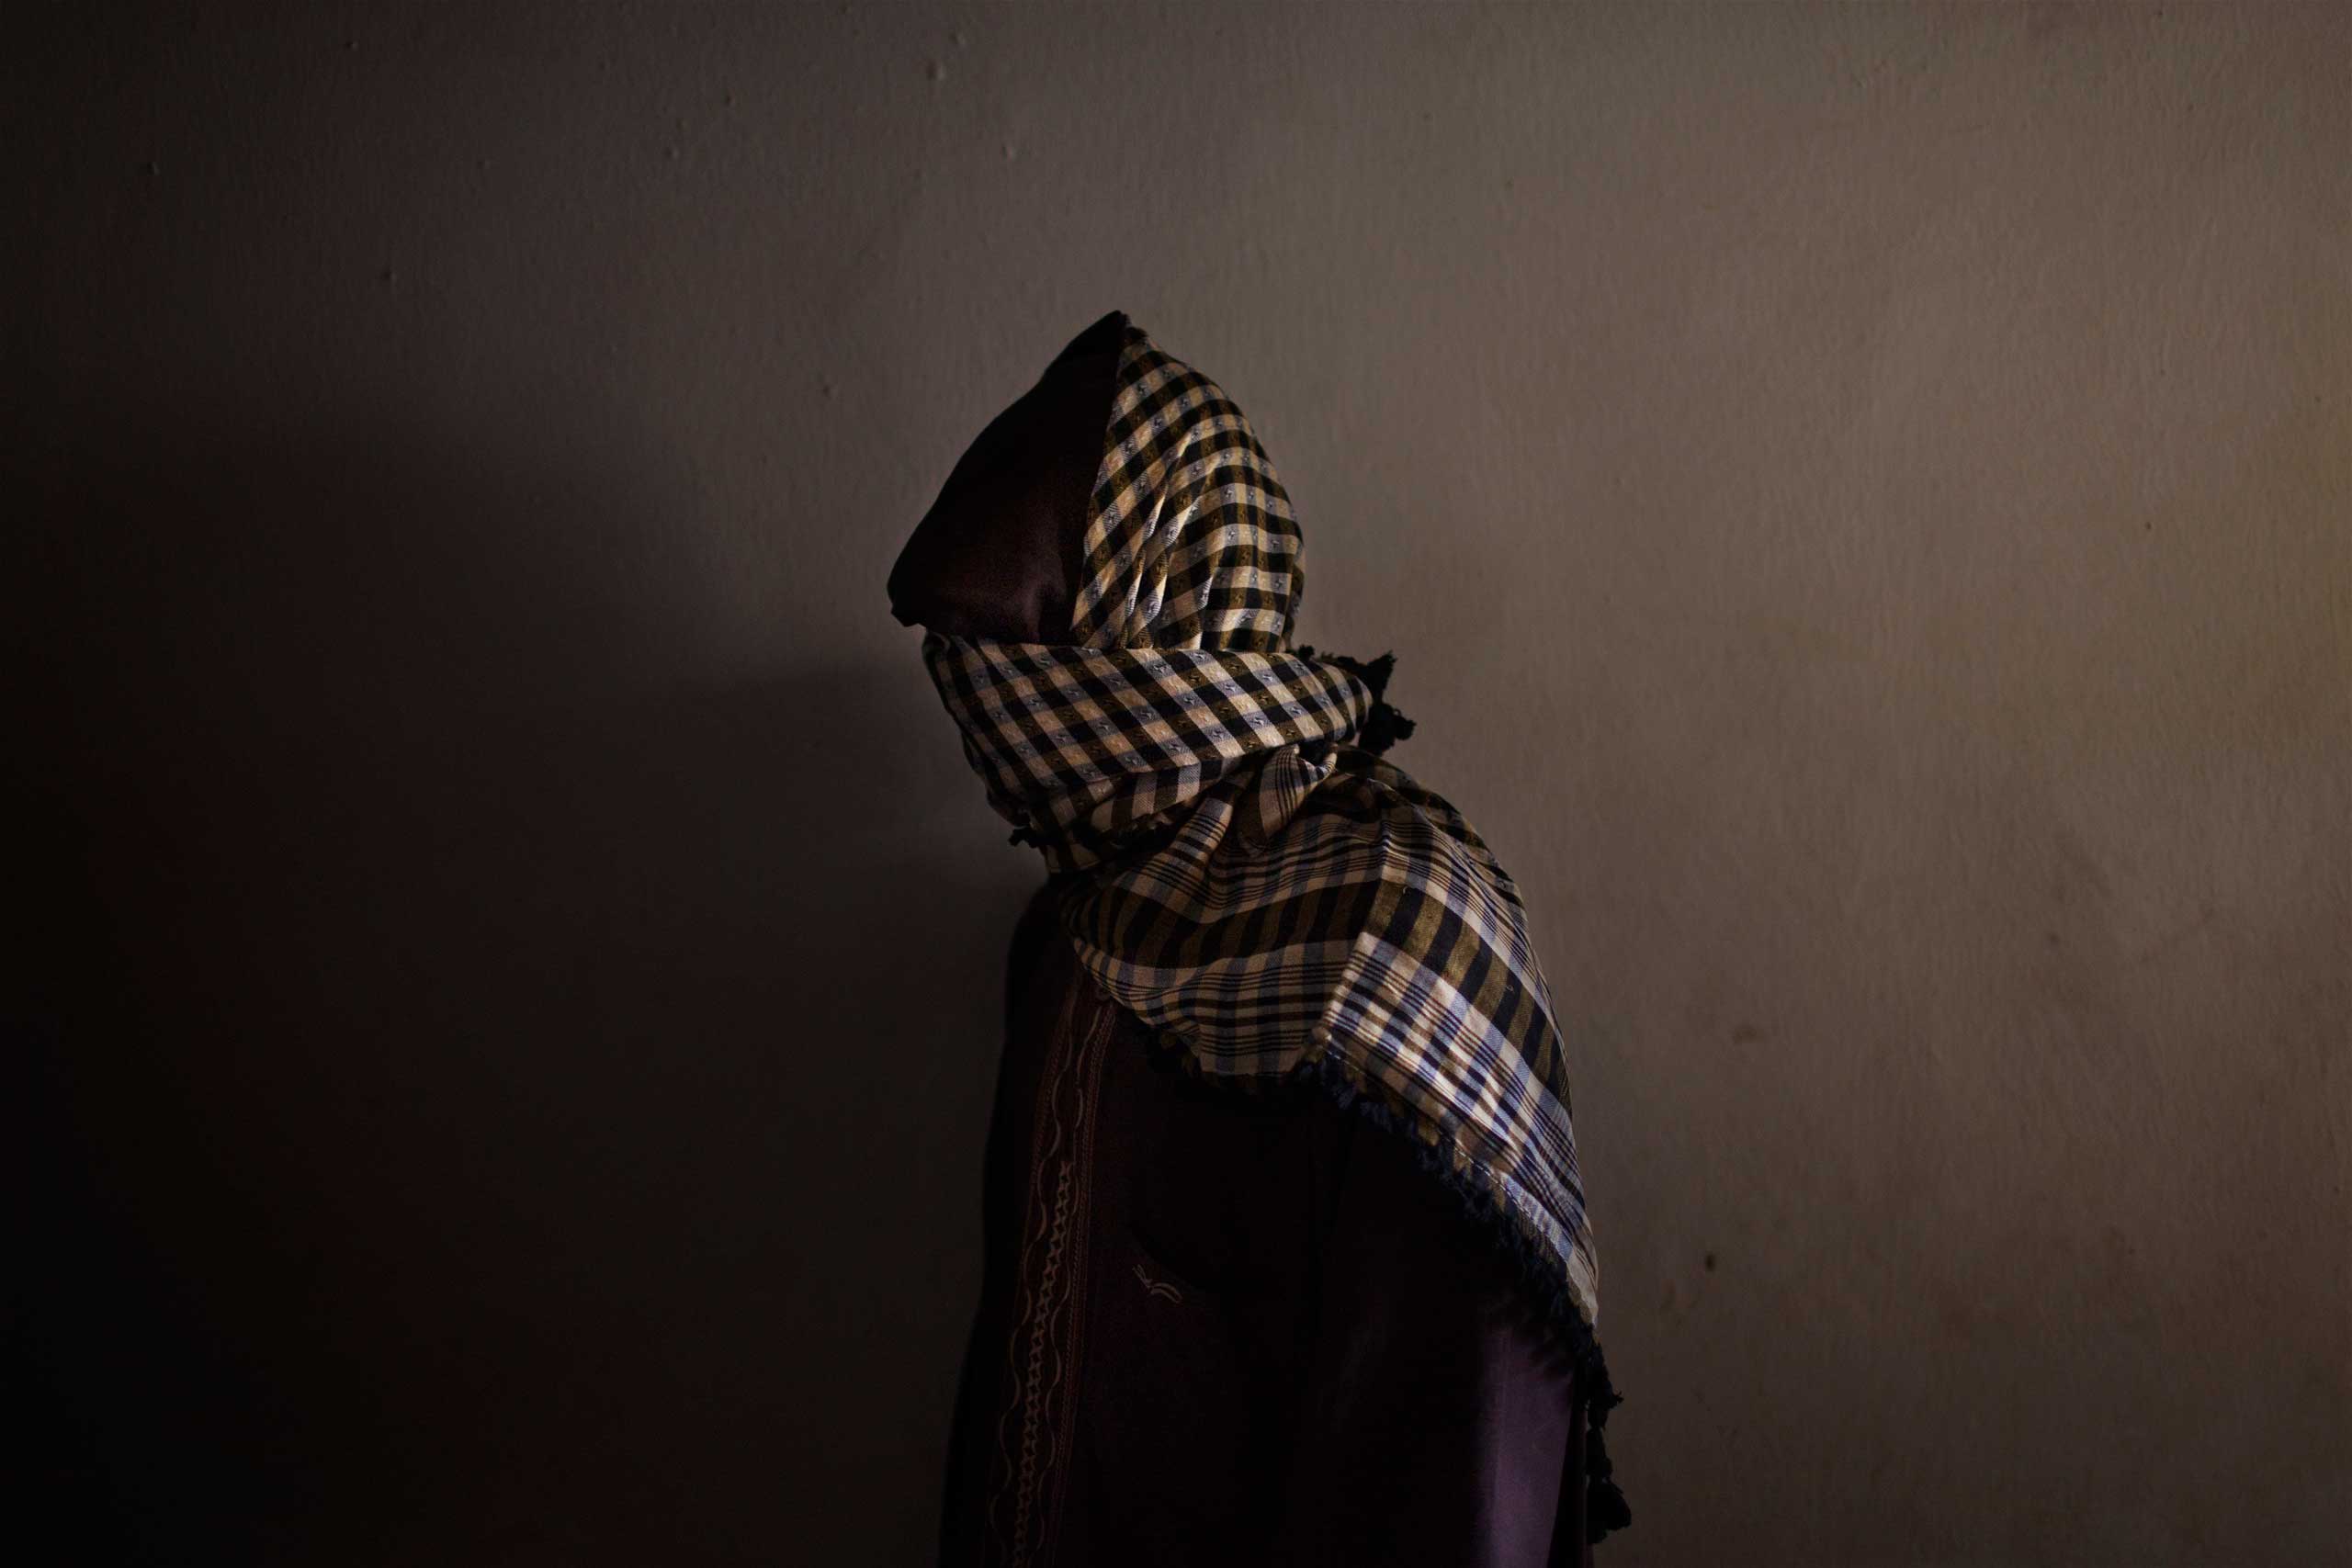 A member of Boko Haram seen in a suburb of Kano, Nigeria, in 2012 (Samuel James—The New York Times/Redux)